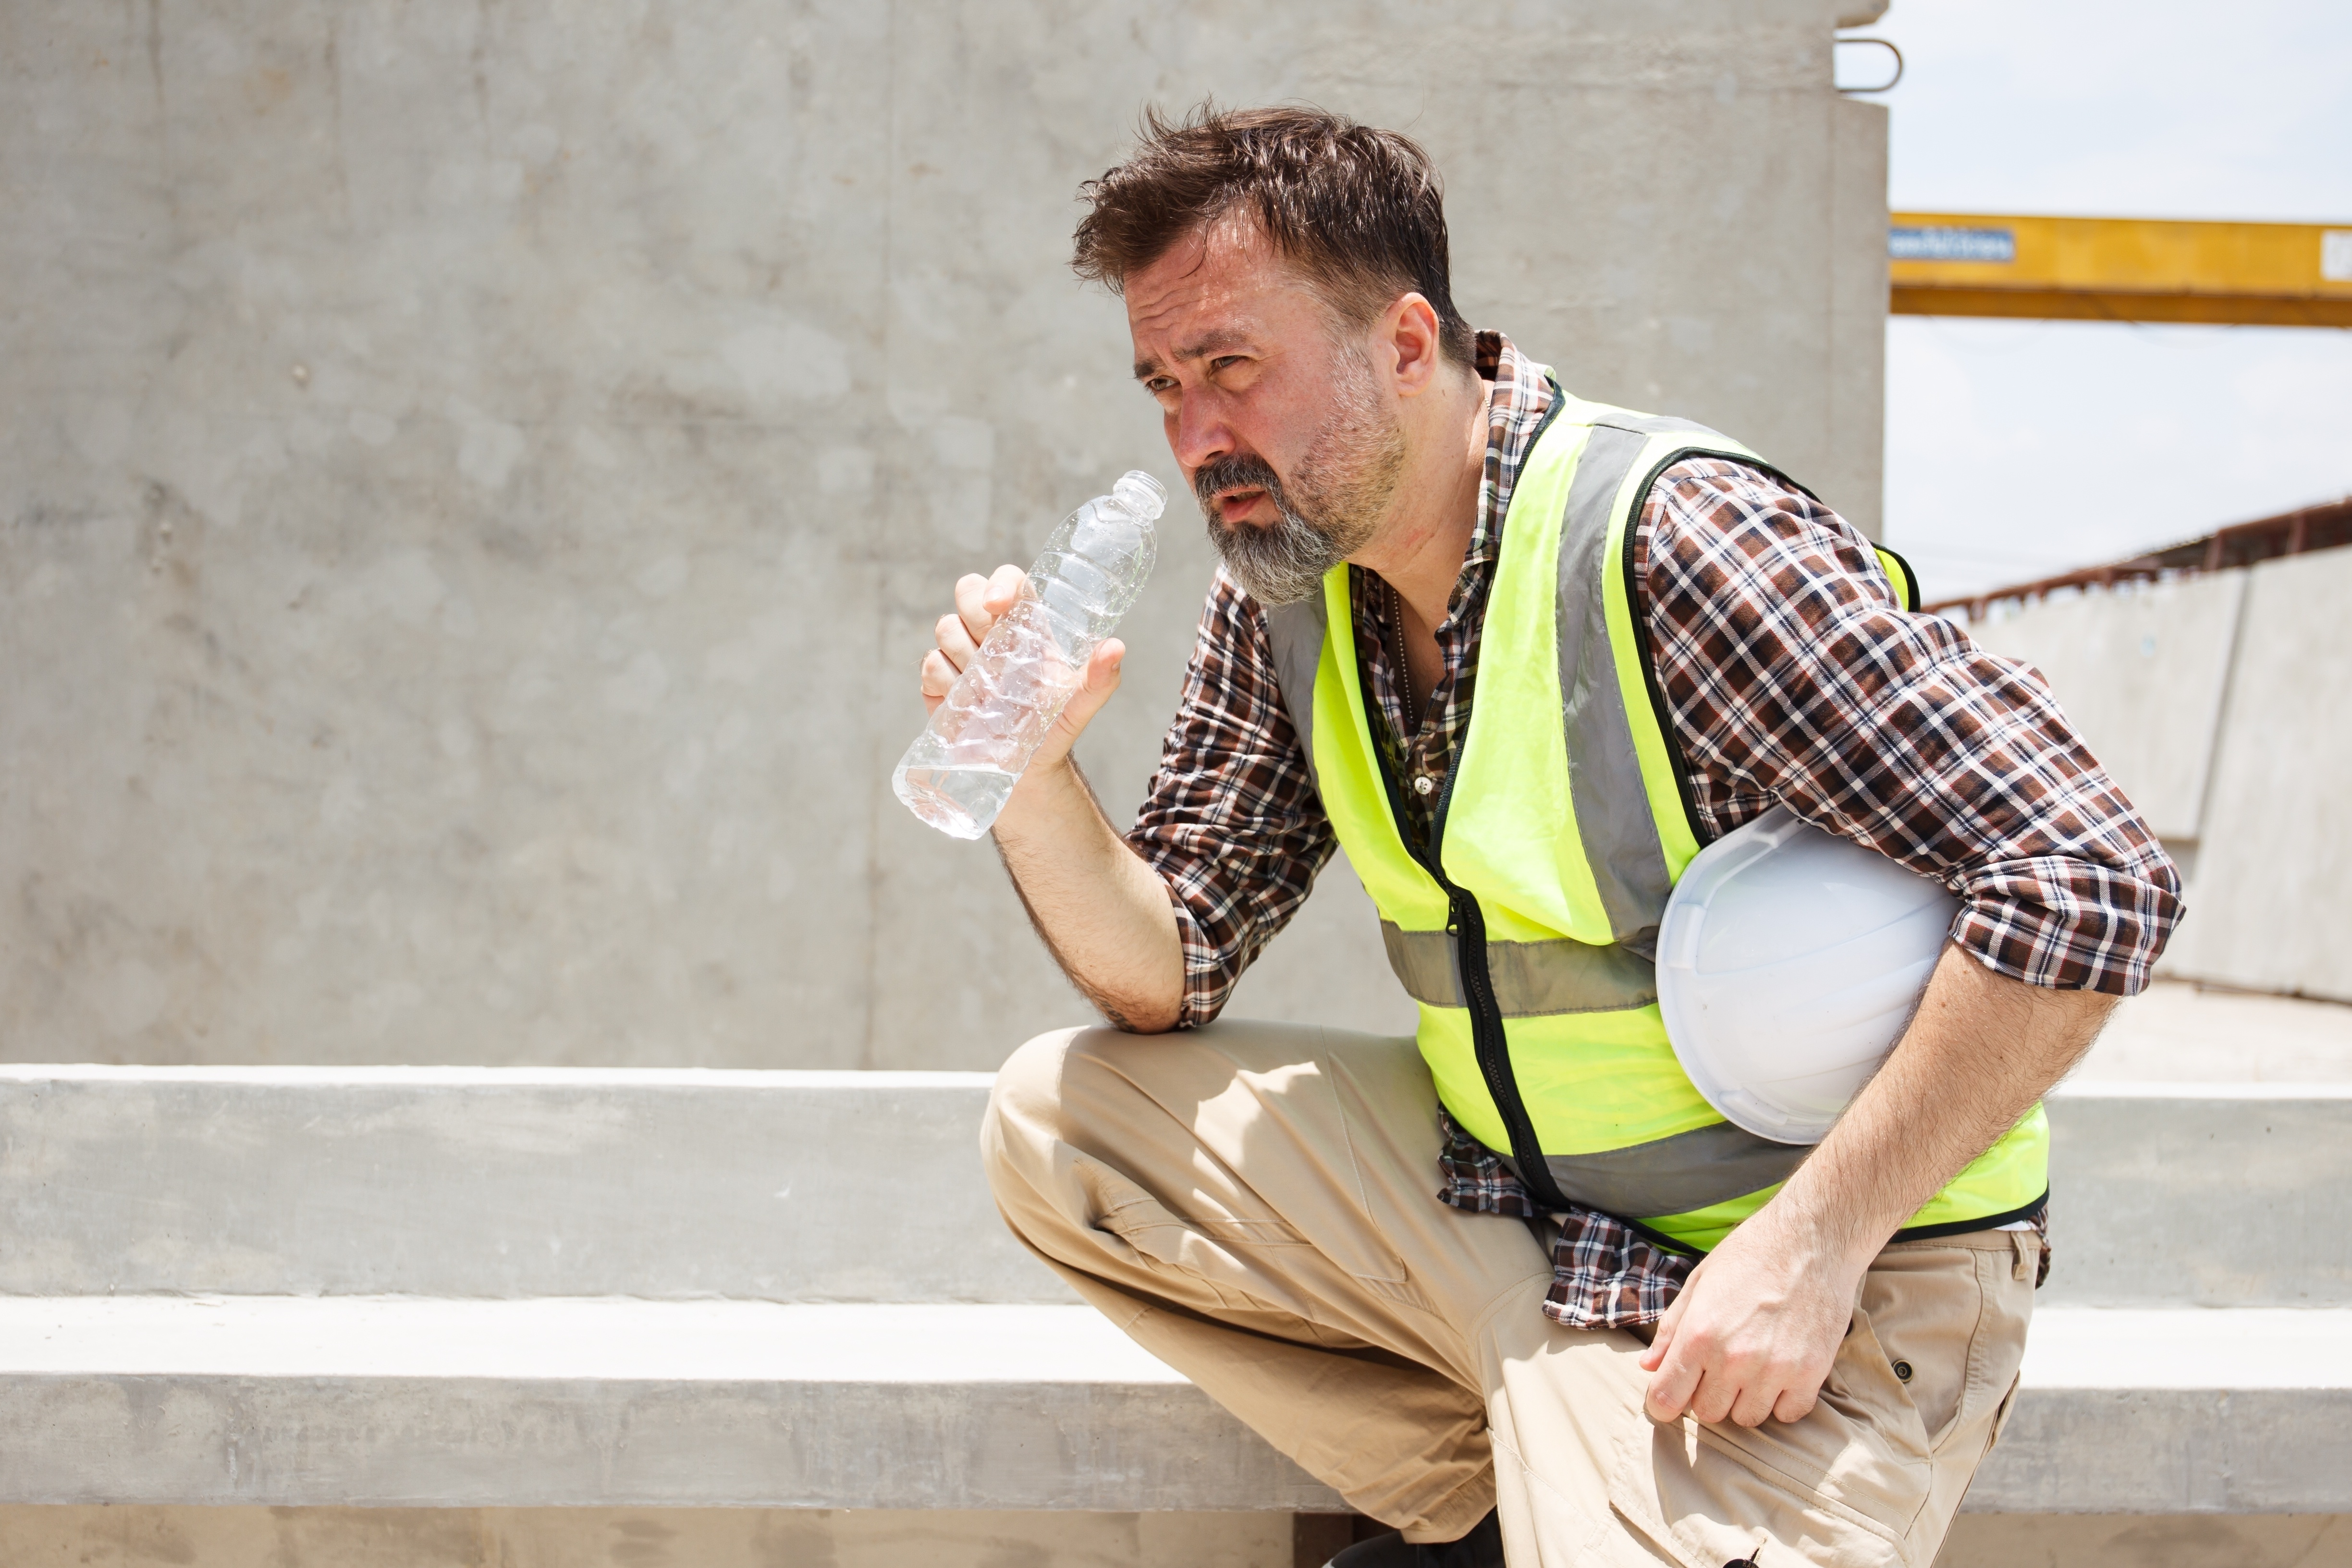 worker outside in heat about to drink water